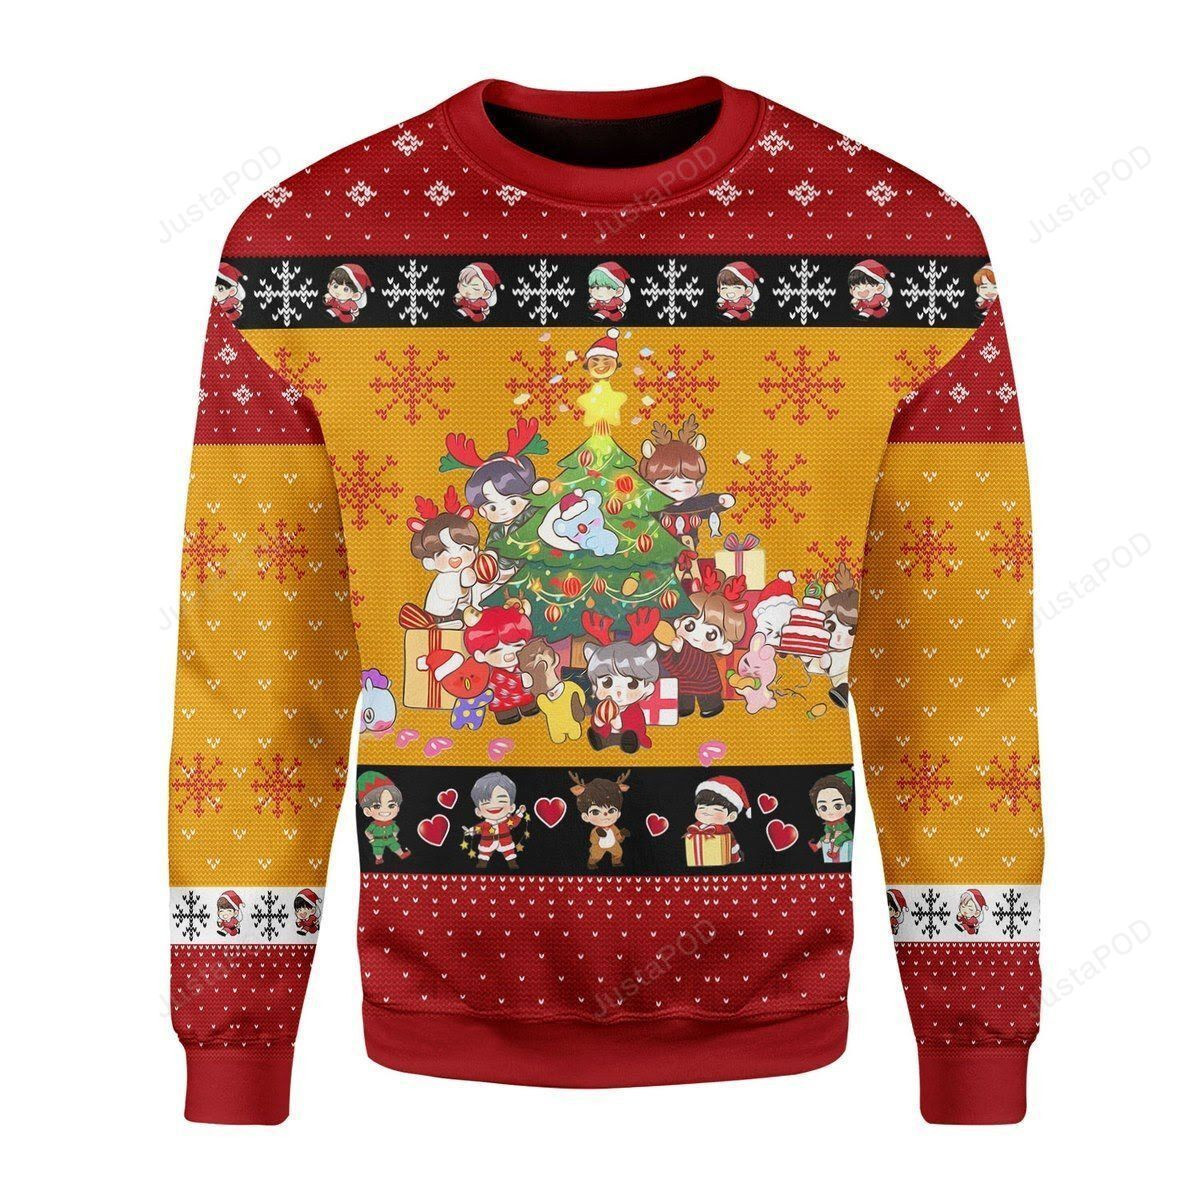 Chibi BTS Ugly Christmas Sweater All Over Print Sweatshirt Ugly